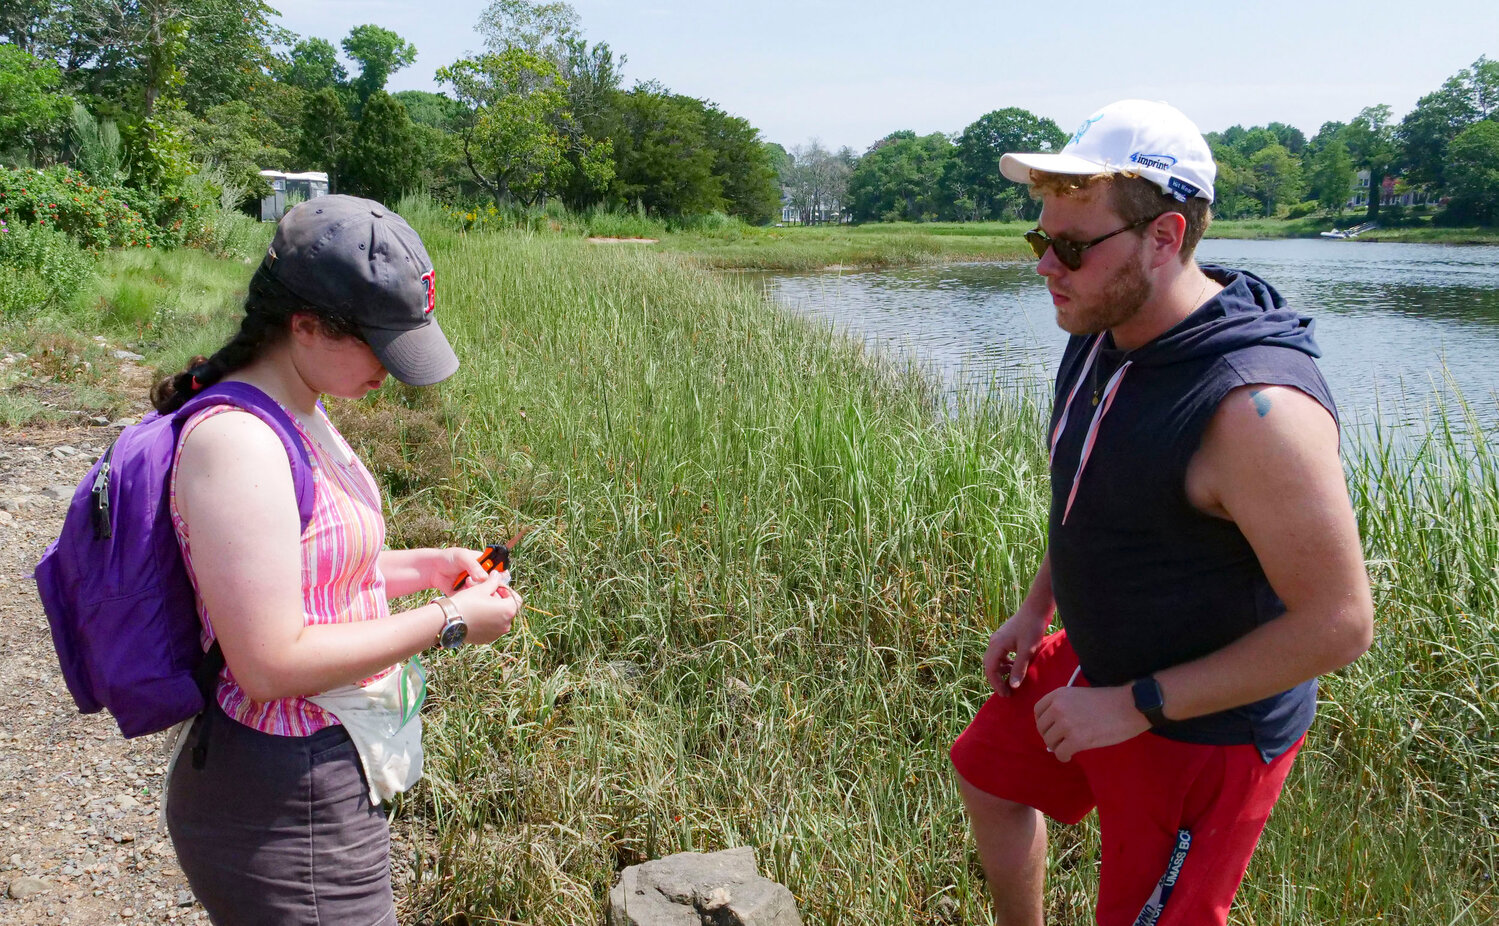 UMASS biochemistry researchers Alice Palmer and Cameron Gray collected samples of “Salicornia” (also known as “glasswort”) for a project related to genetics and ecology of sea marshes.  The marine plant is known for its capacity to pull and quarantine heavy metals from sea water. 